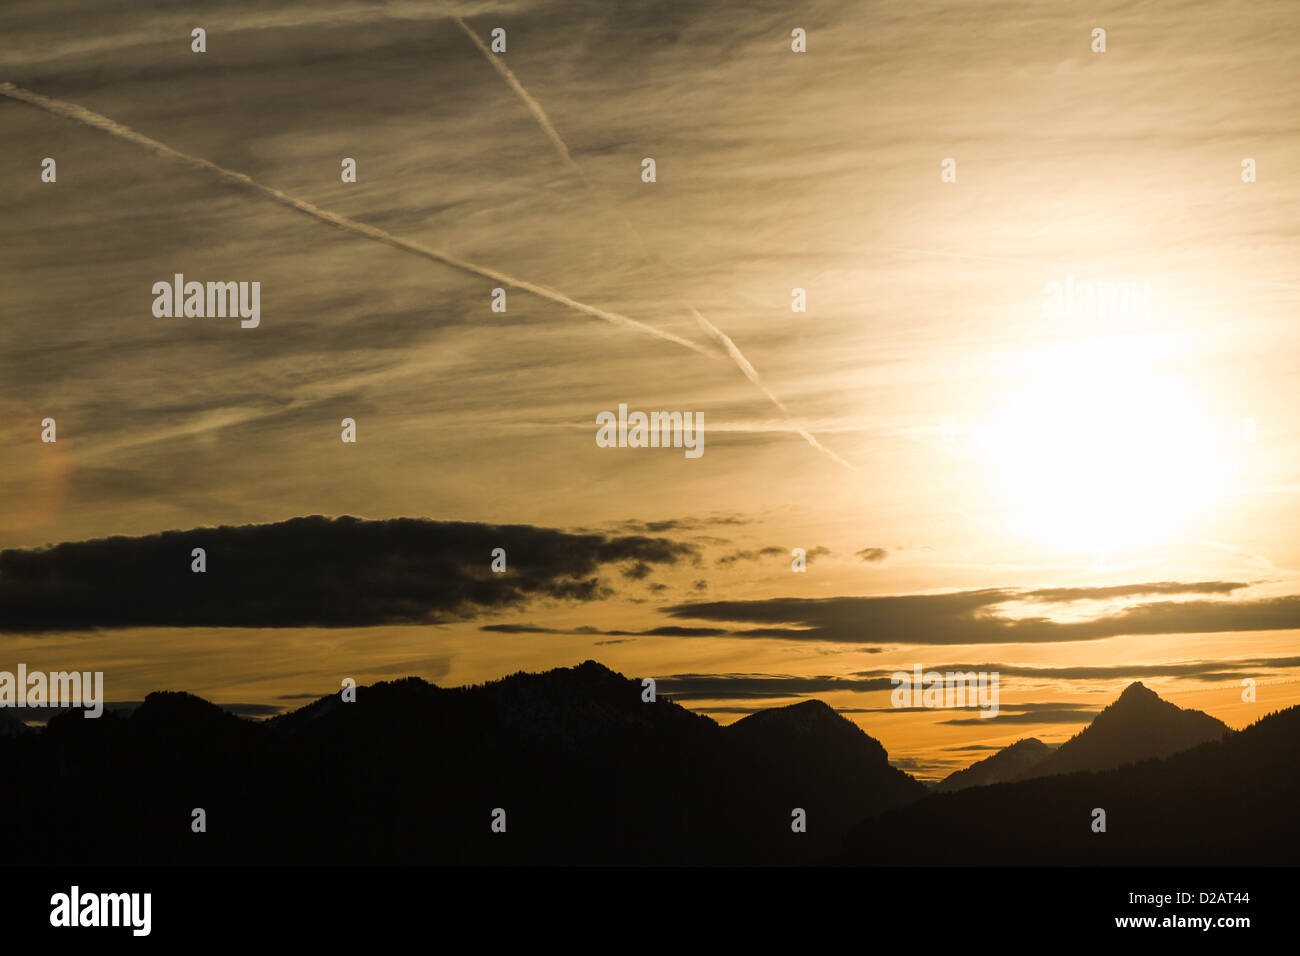 Silhouette of mountains at sunset Stock Photo